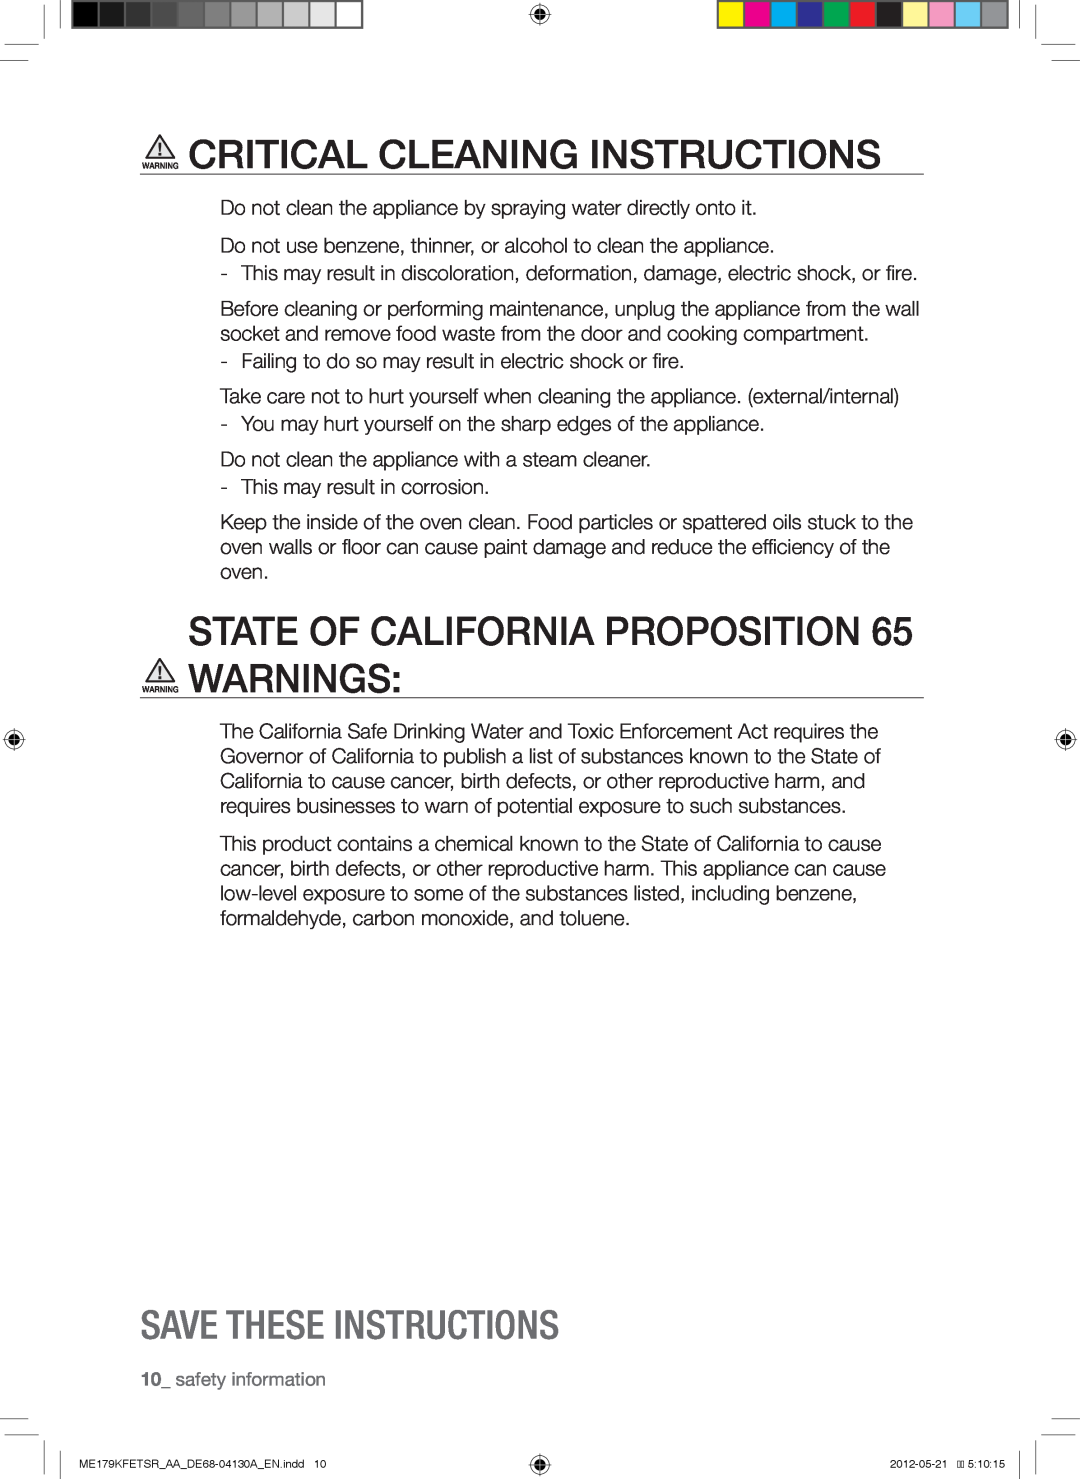 Samsung ME179KFETSR user manual Warning Critical Cleaning Instructions, STATE OF CALIFORNIA PROPOSITION 65 WARNING WARNINGS 